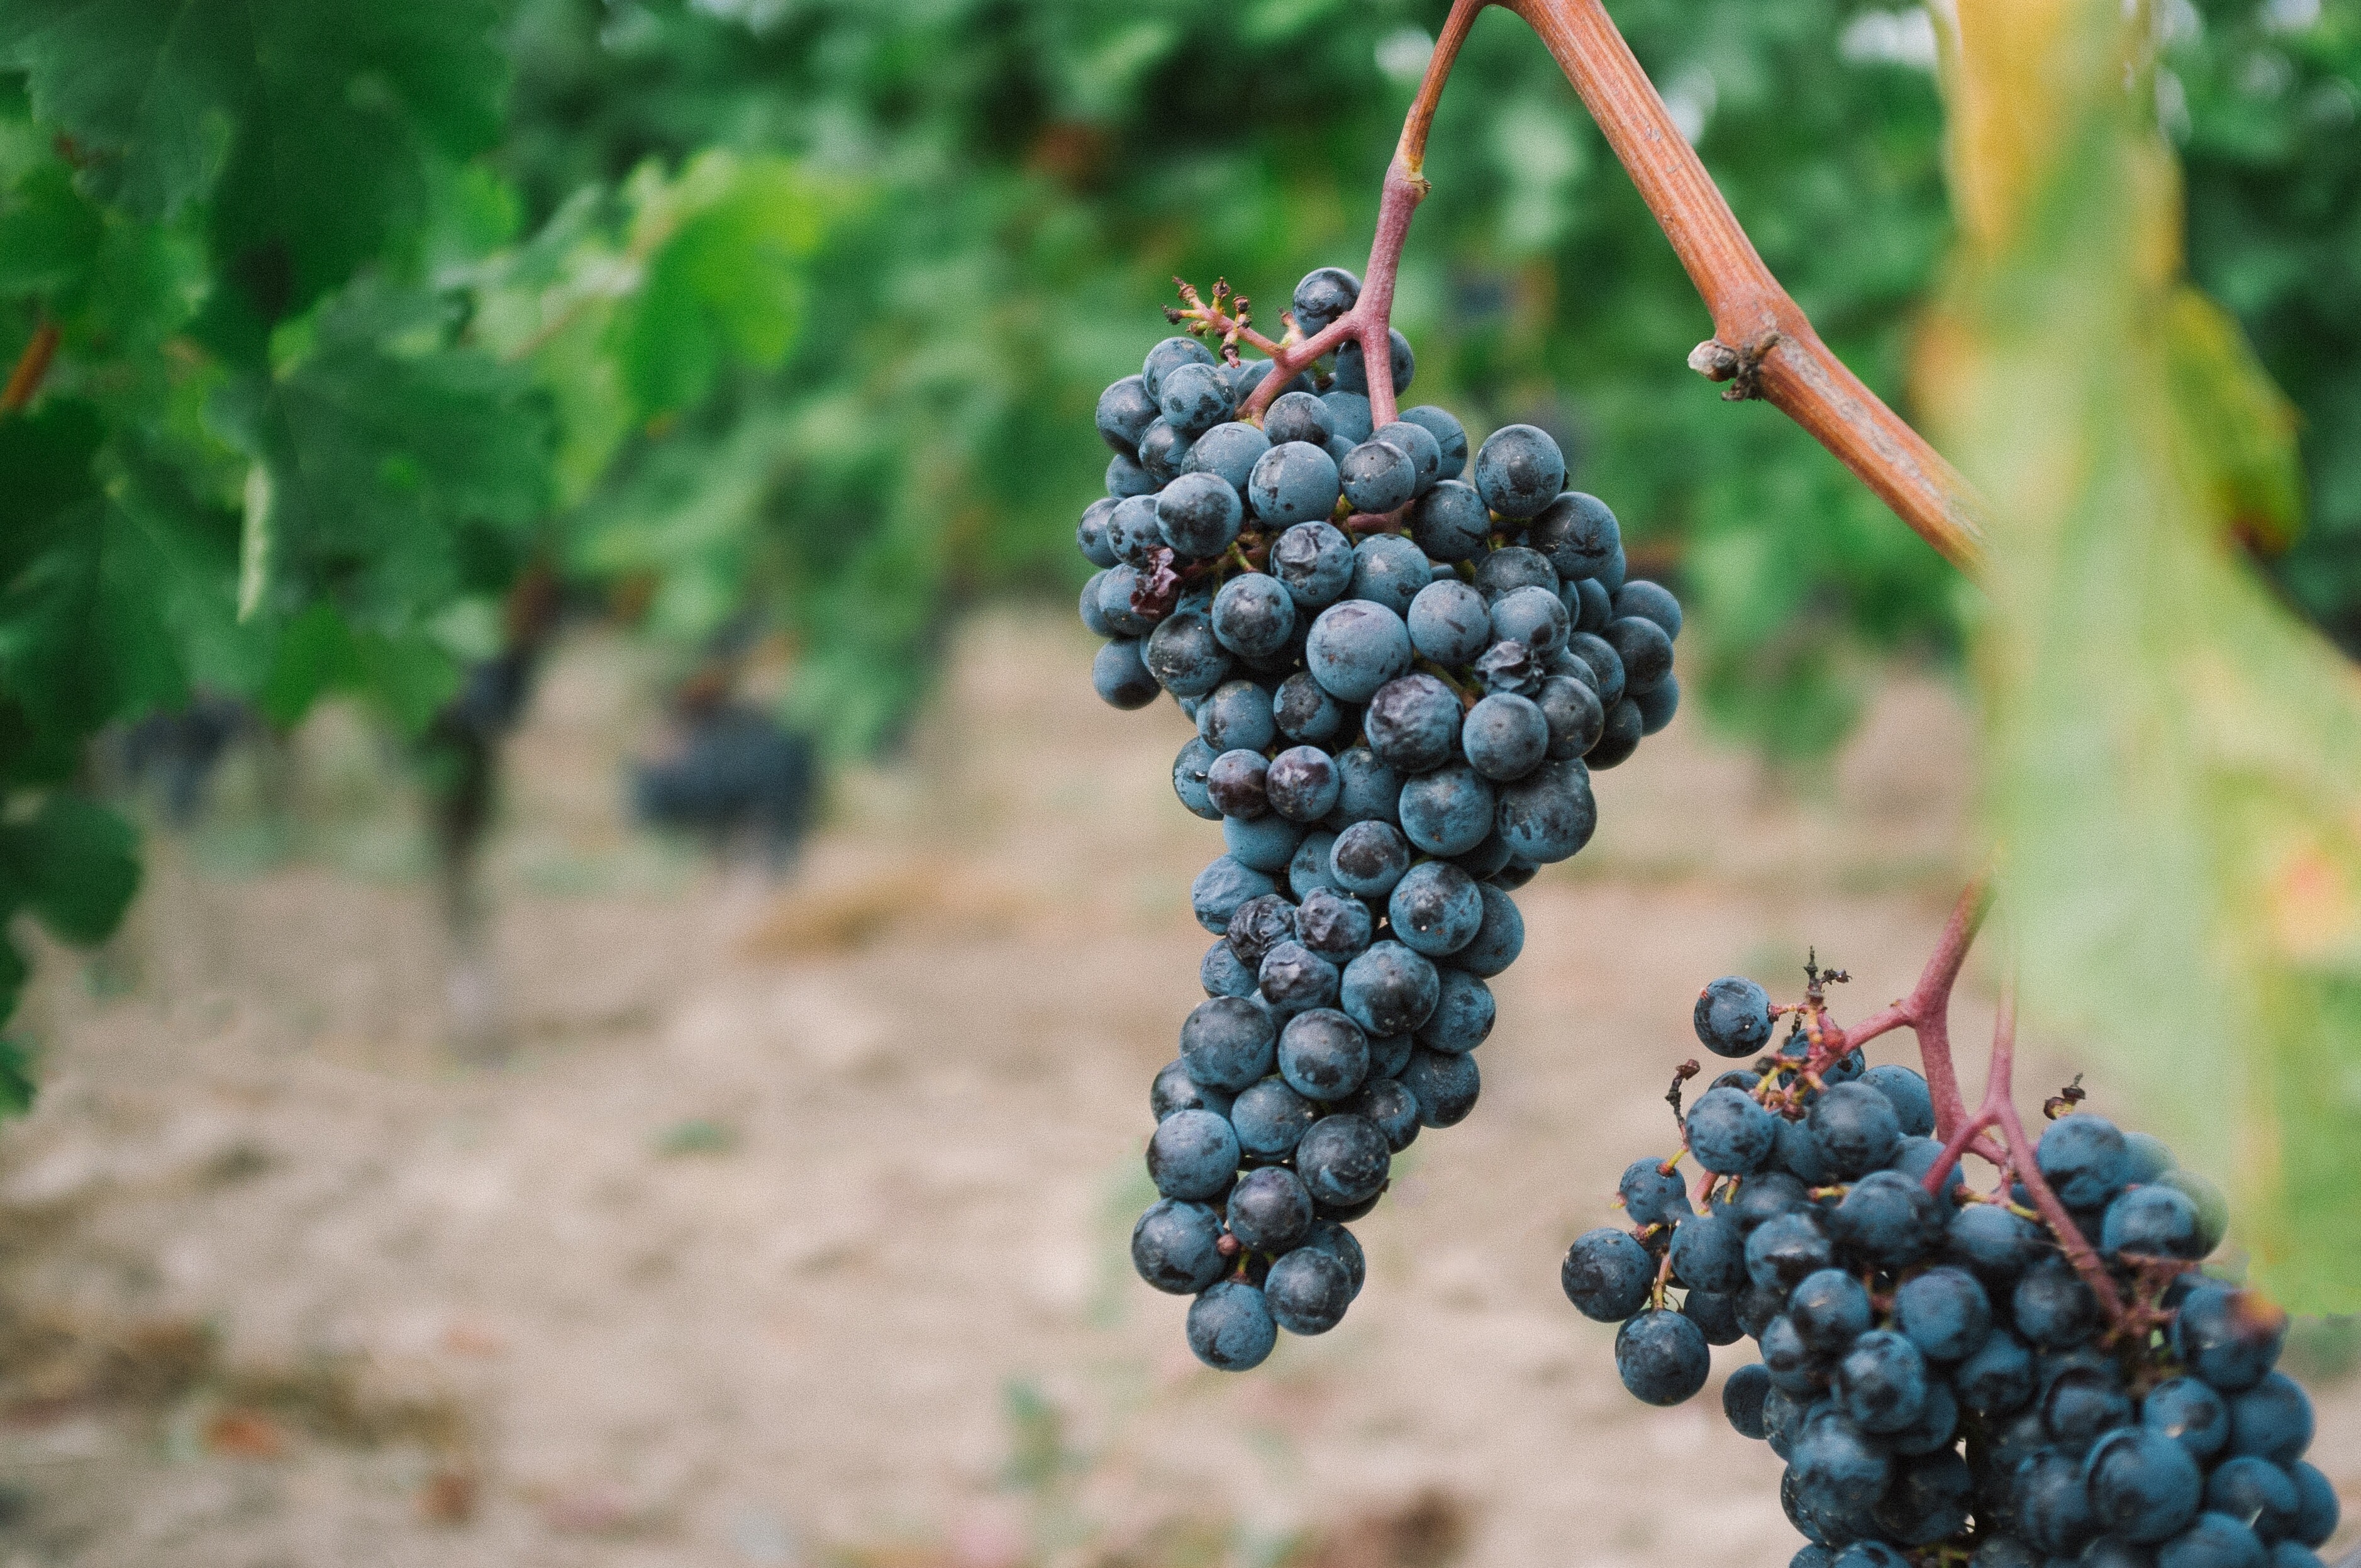 Merlot and Cabernet Sauvignon grapes are two of the key varietals in Bordeaux